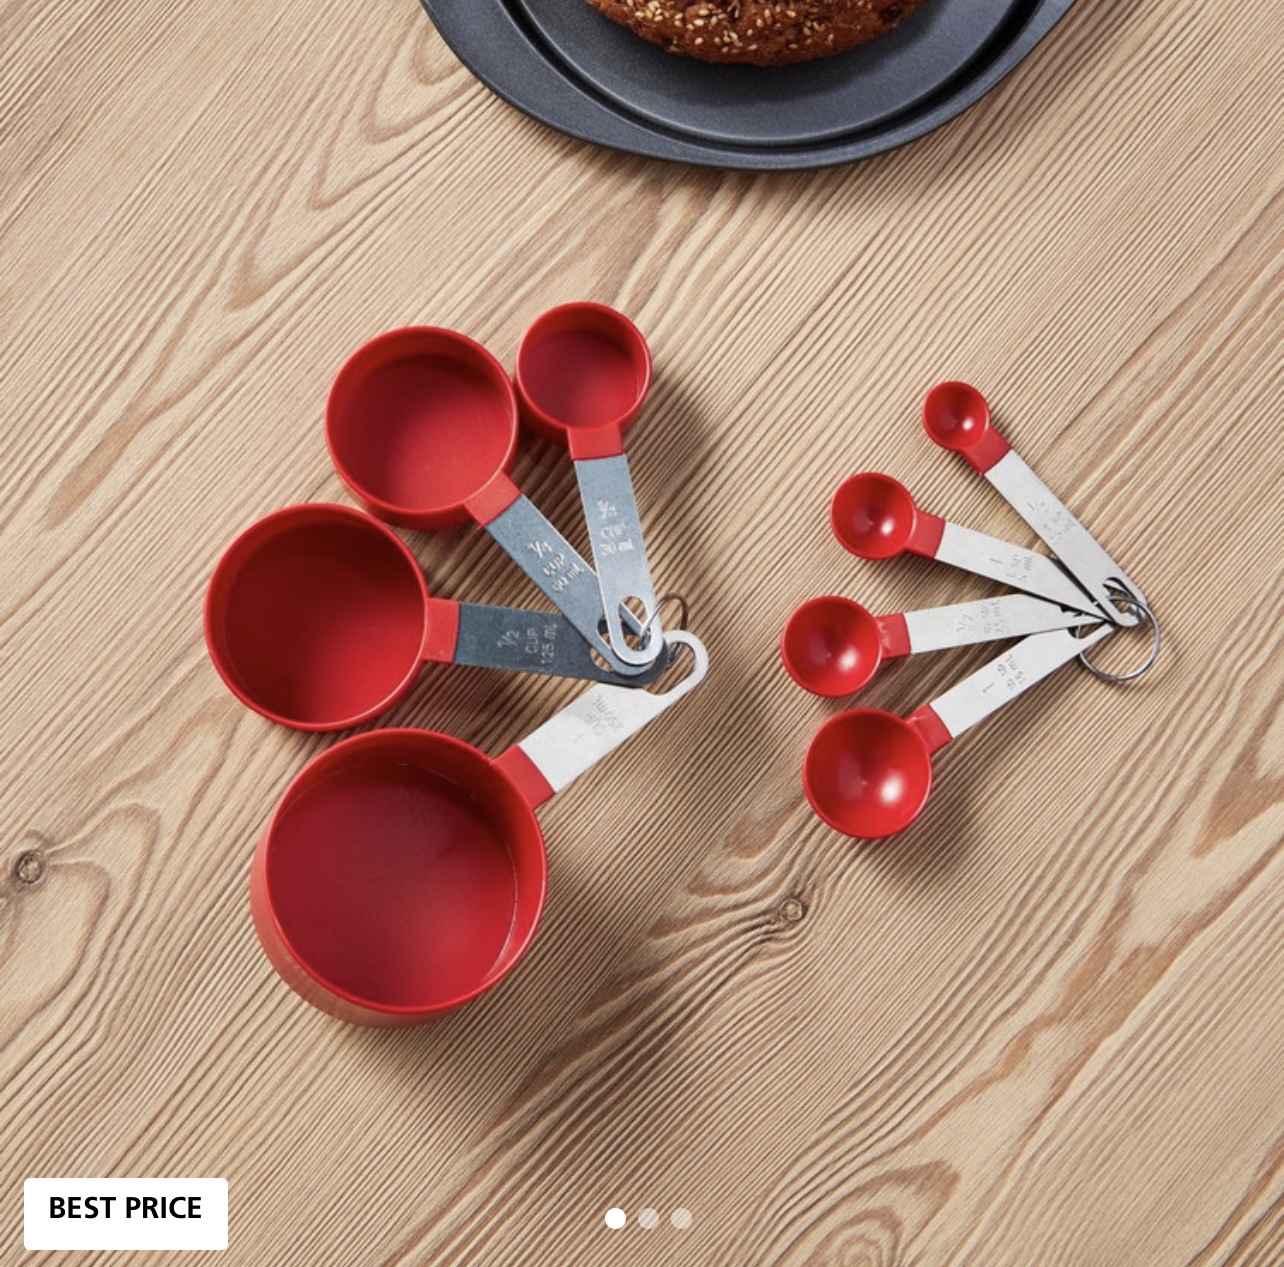 Betty Crocker Red MEASURING CUPS AND MEASURING SPOONS 8 PIECE SET - NEW